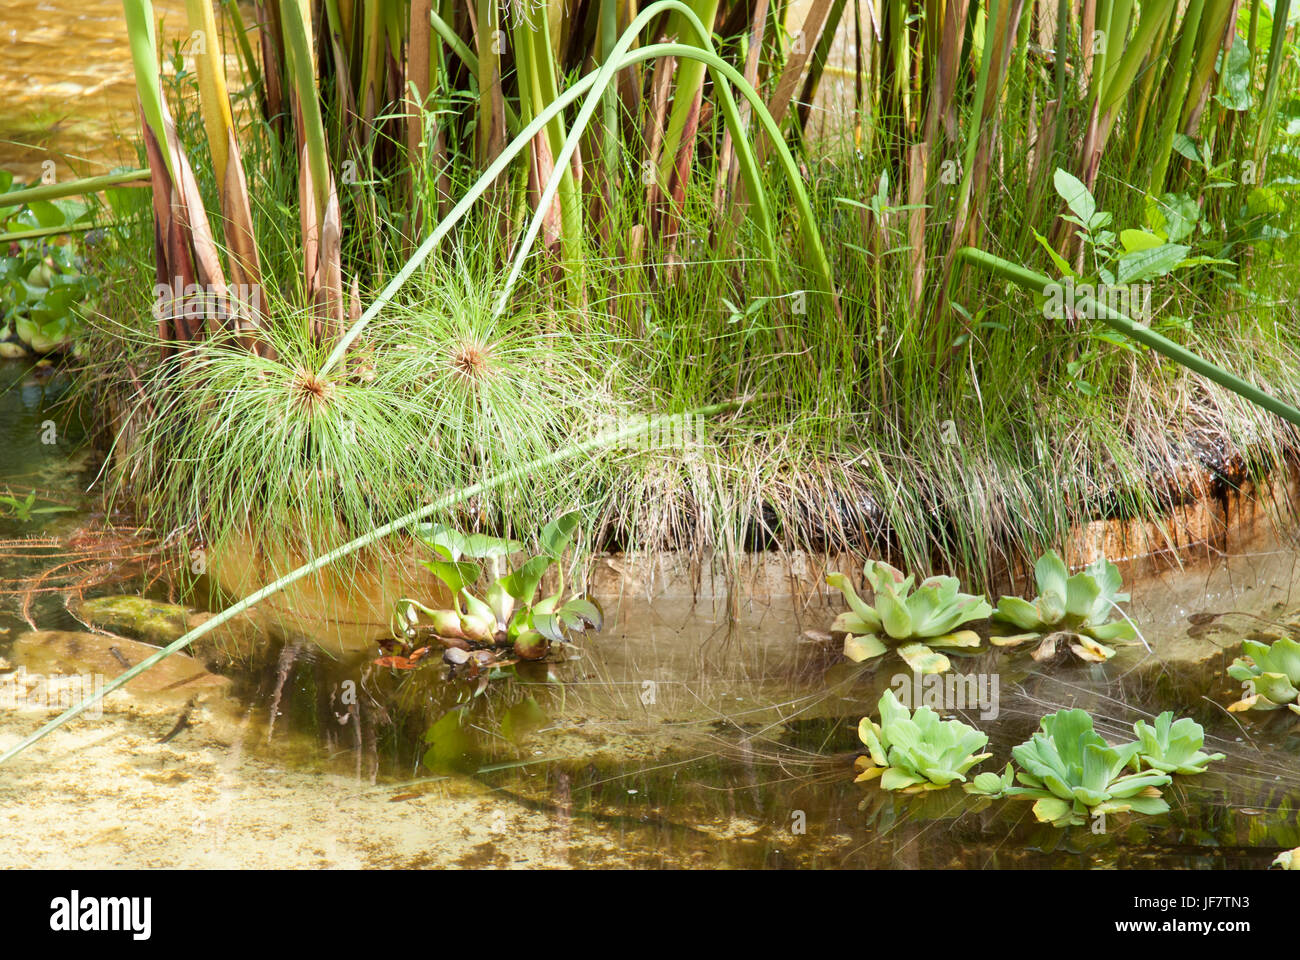 Papyrus, paper plant, bulrush (Cyperus papirus) and water cabagge (Pistia stratiotes) in a pond Stock Photo